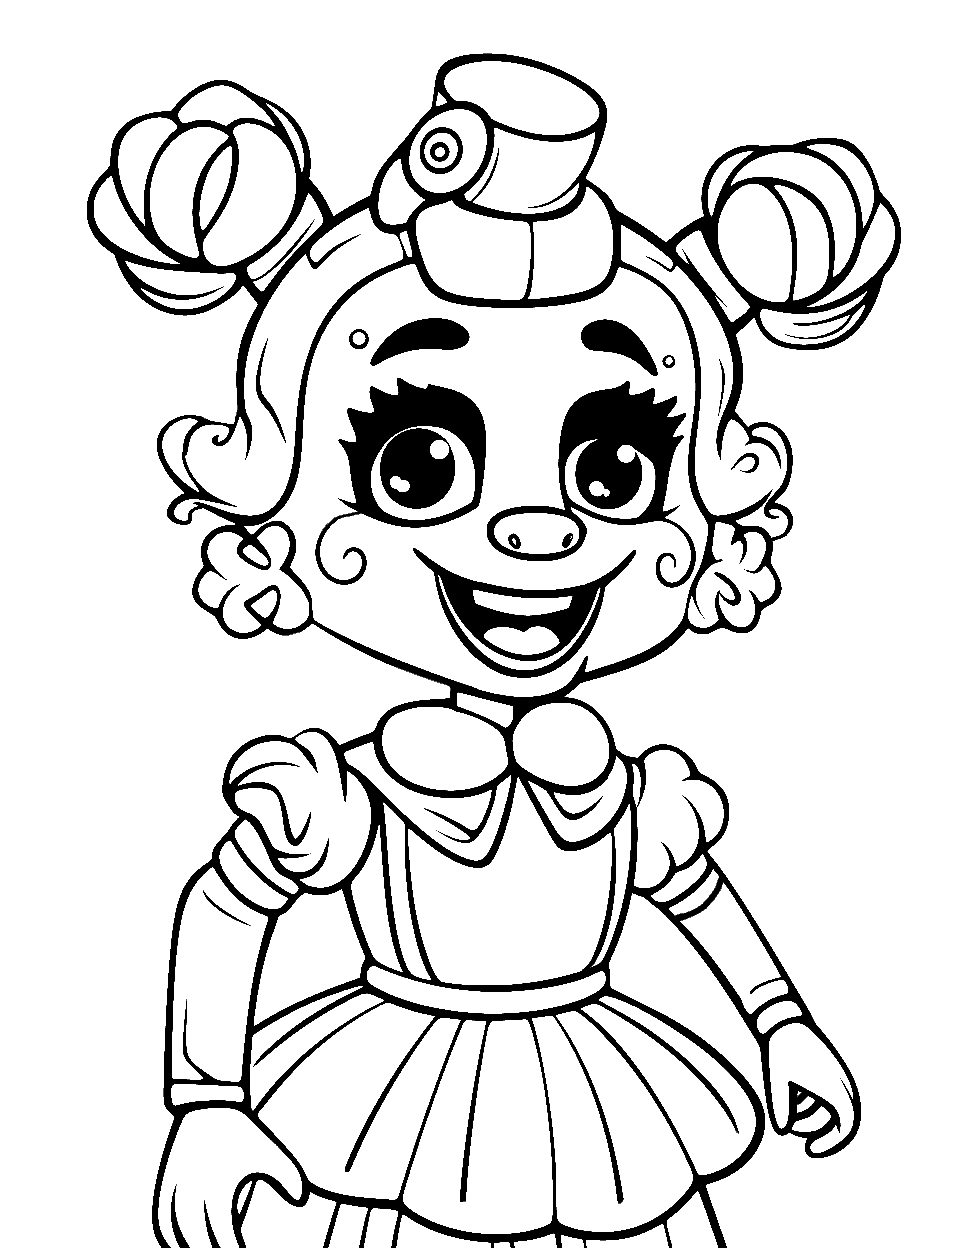 Cute Five Nights at Freddy's Coloring page